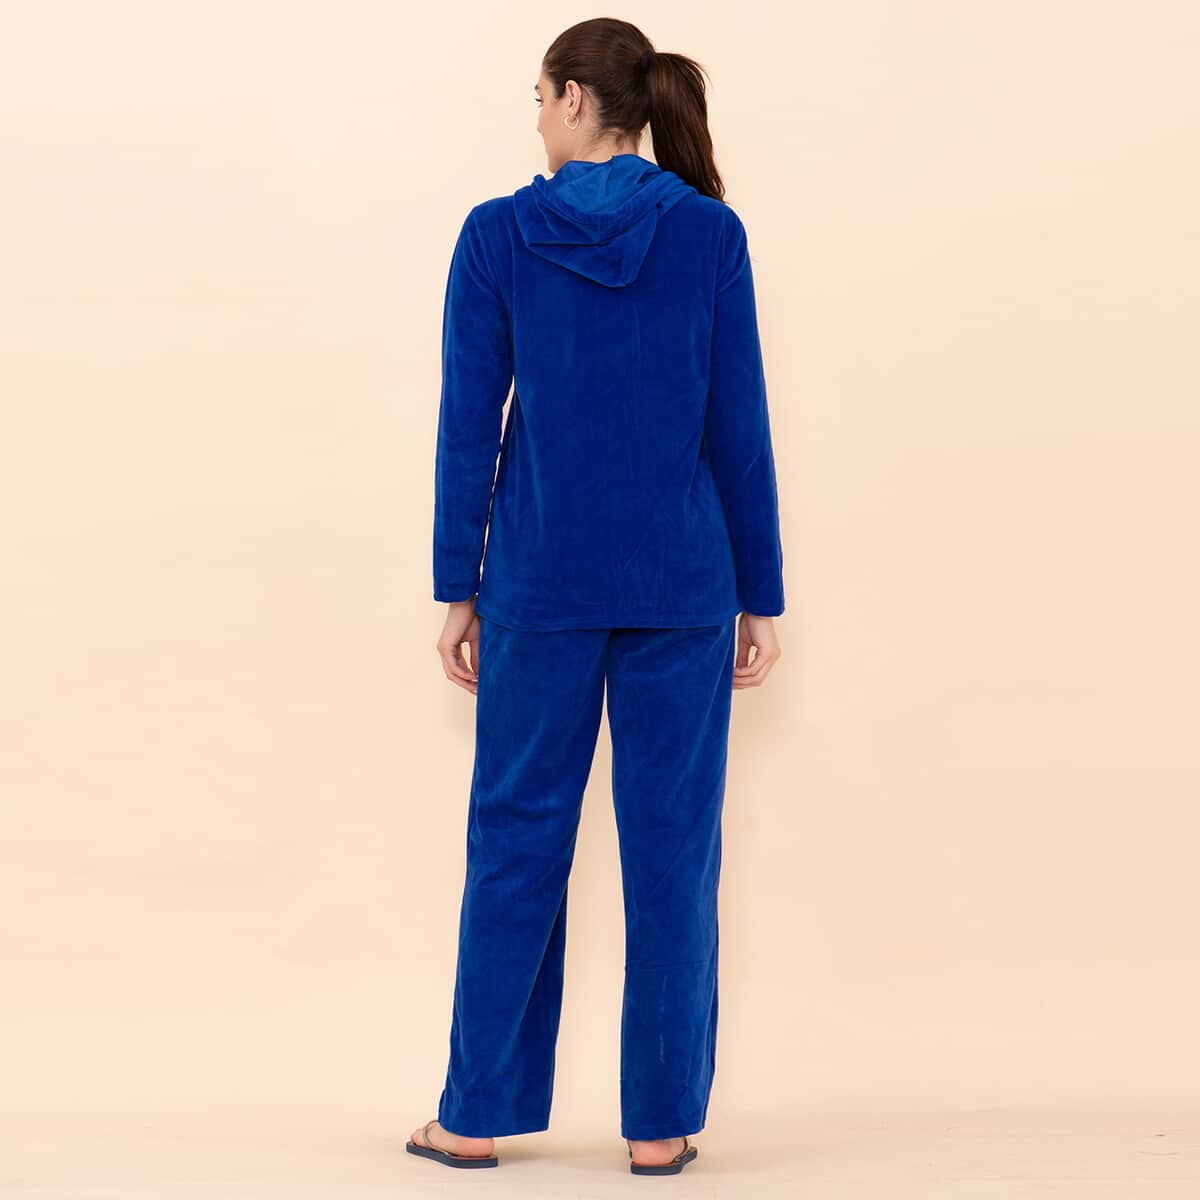 Tamsy LUX Blue Velour Track Suit Set - 1X image number 1